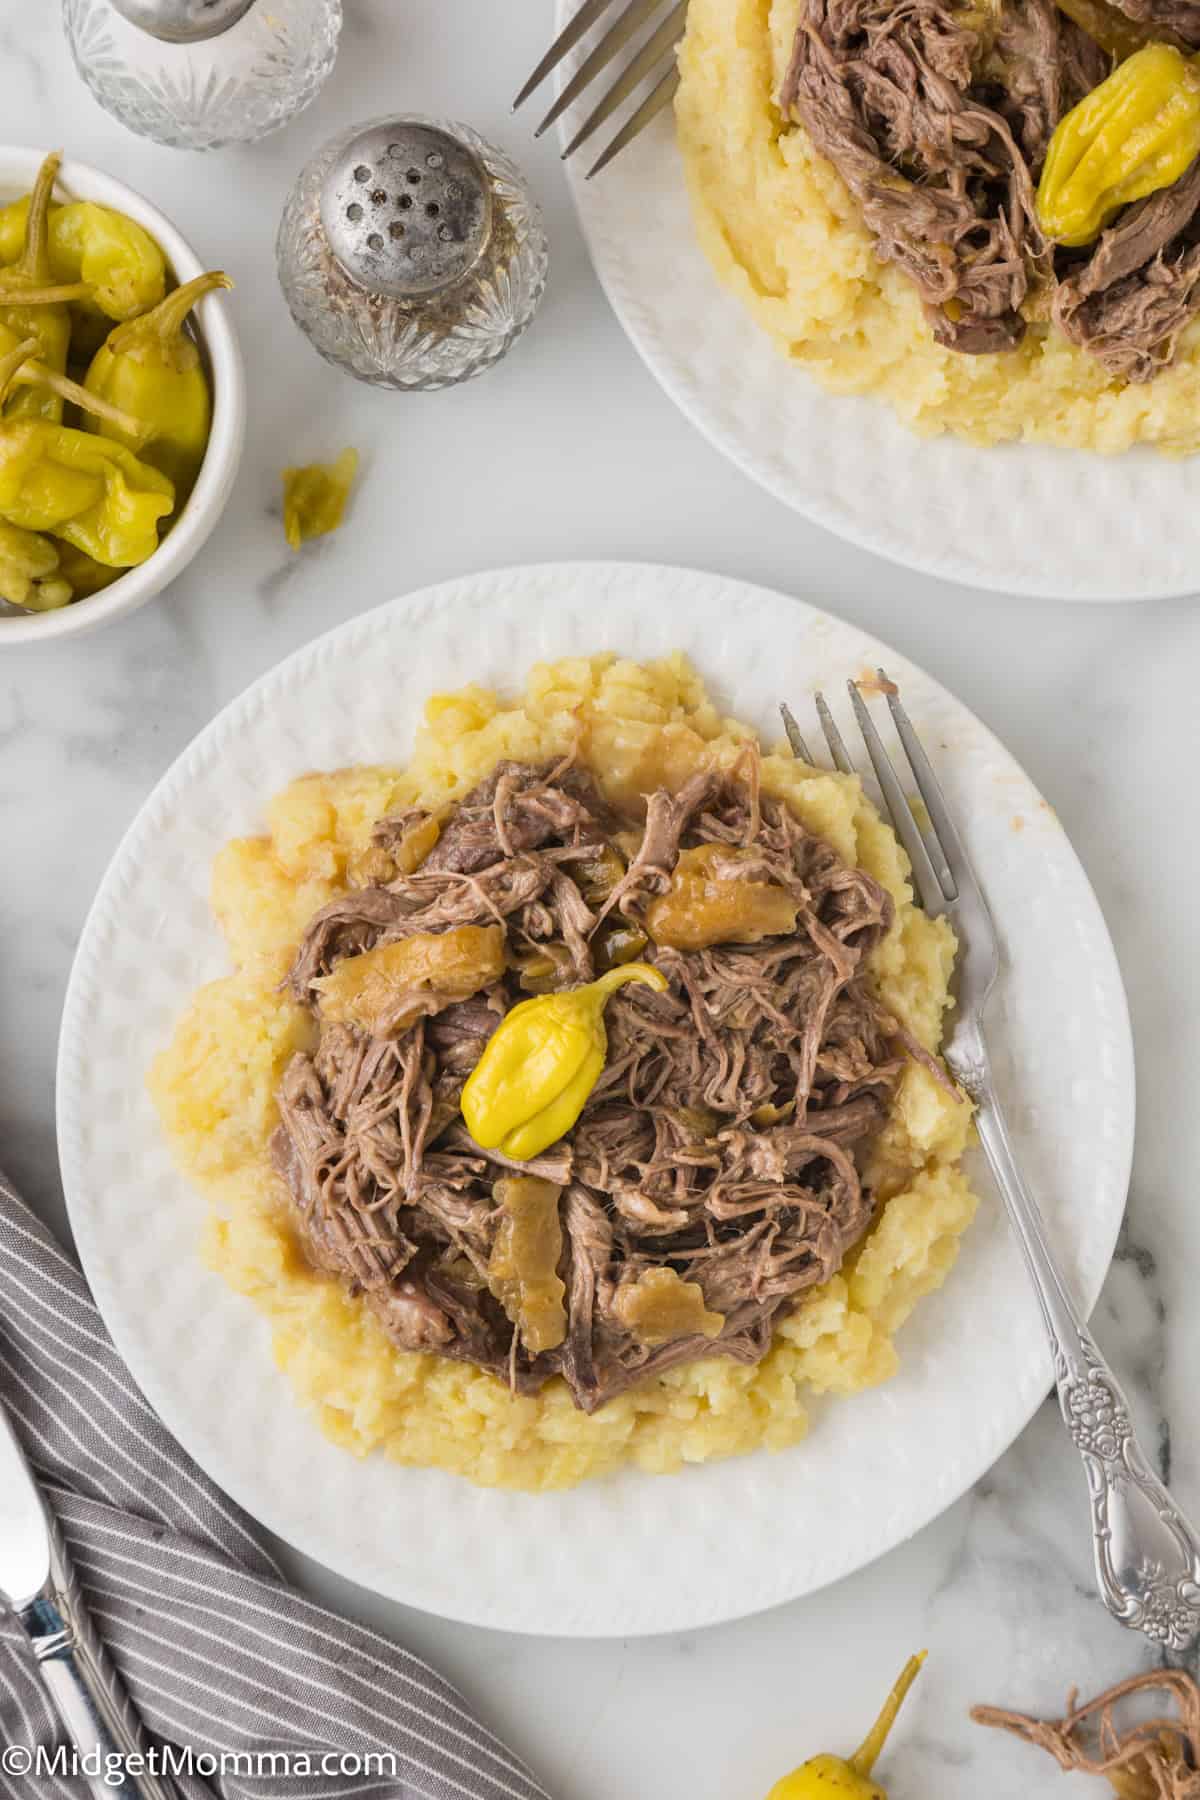 A plate of shredded beef served on mashed potatoes with peppers on top.